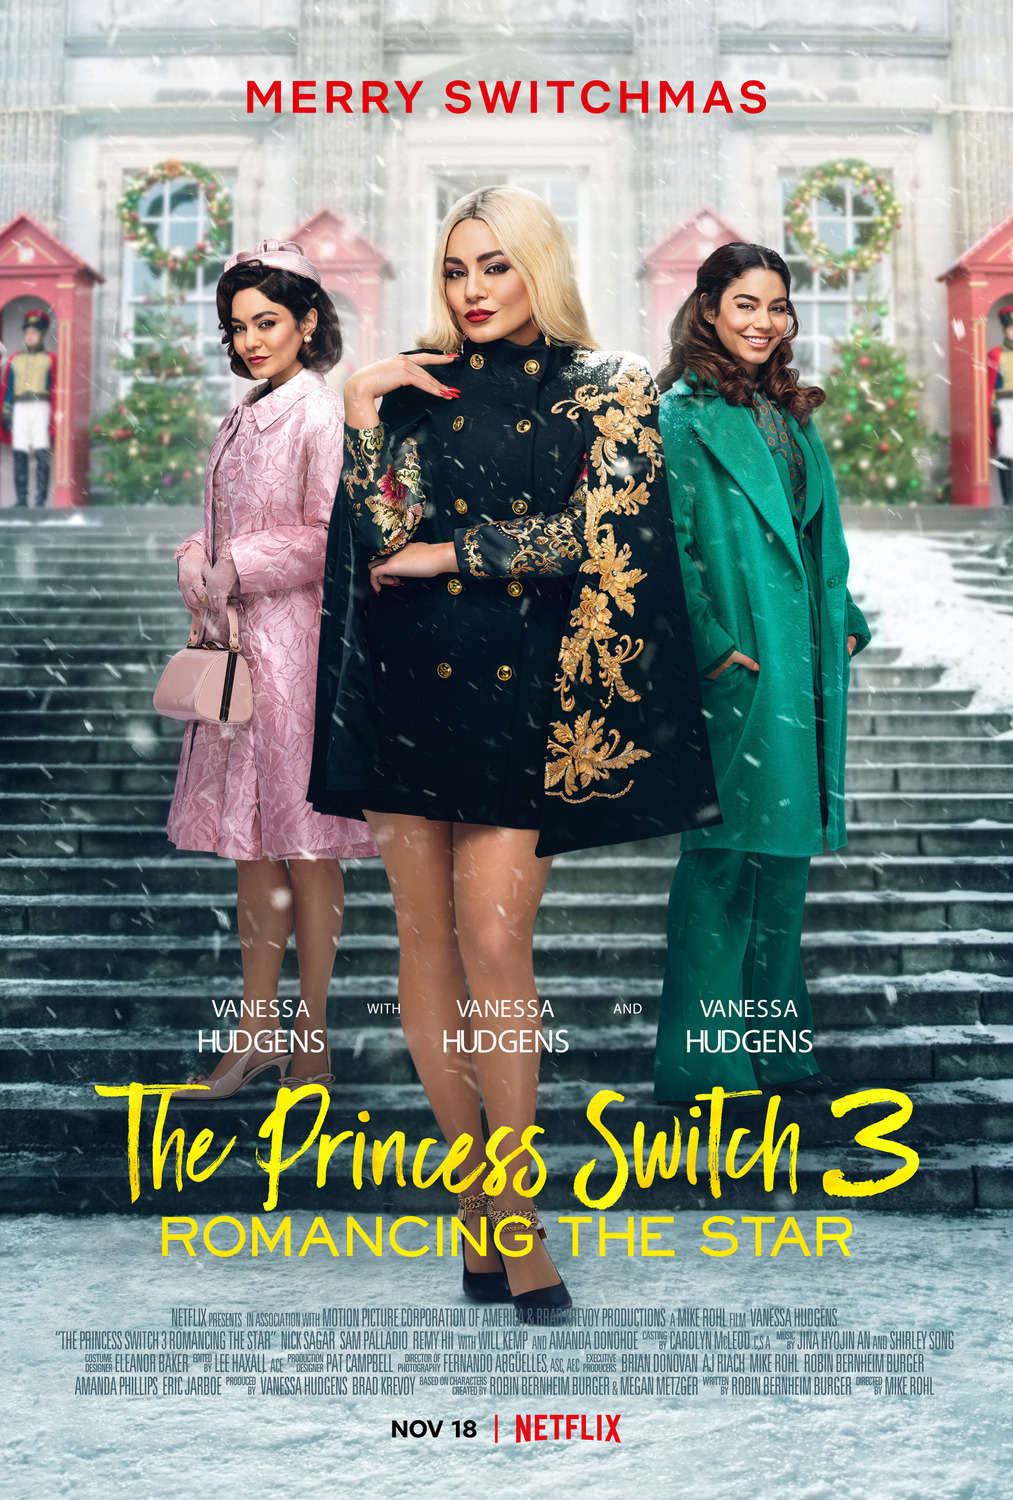 Extra Large Movie Poster Image for The Princess Switch 3: Romancing the Star 